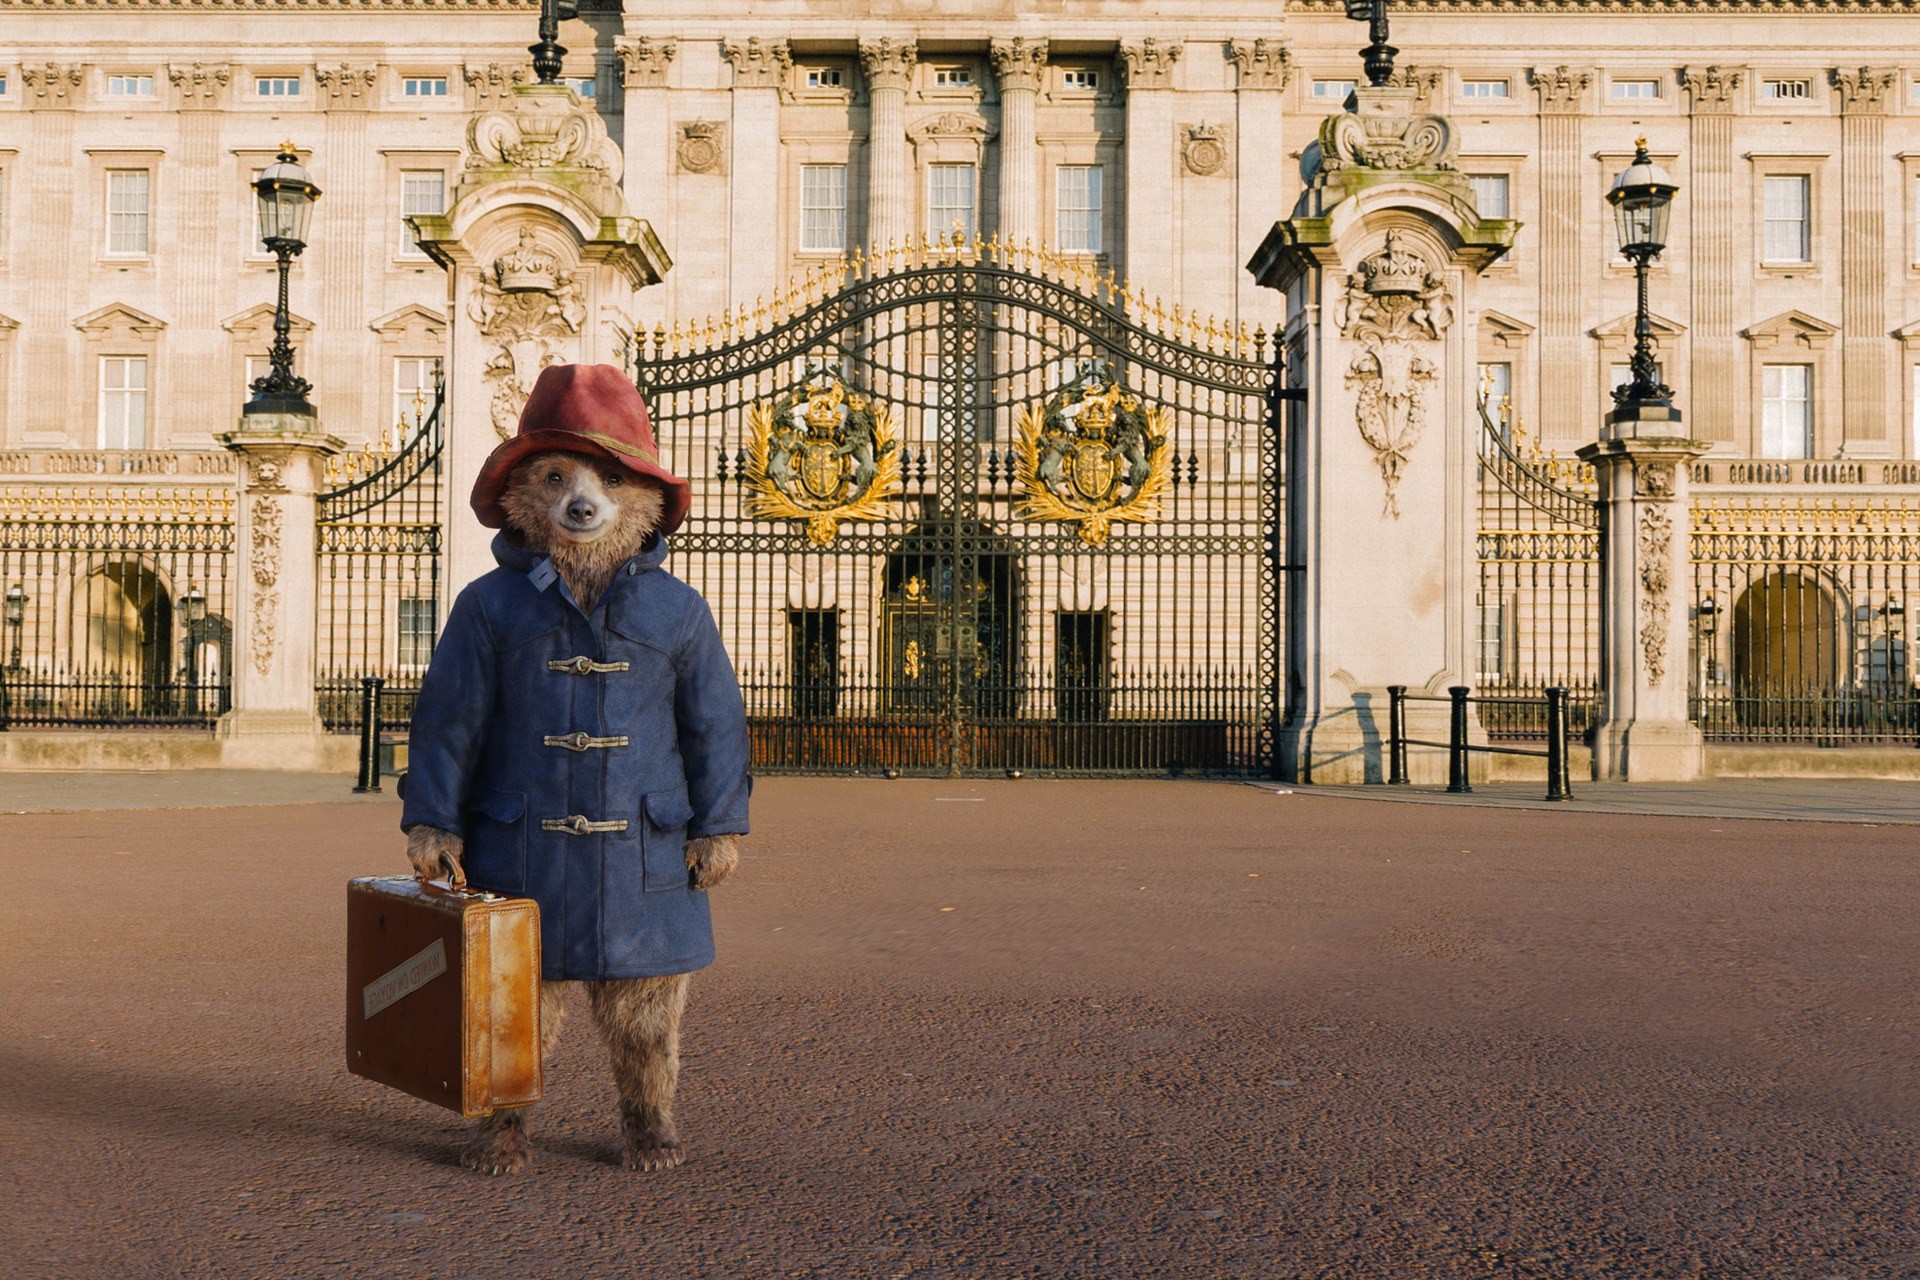 PADDINGTON Is One of the Best Children’s Films in Recent Memory